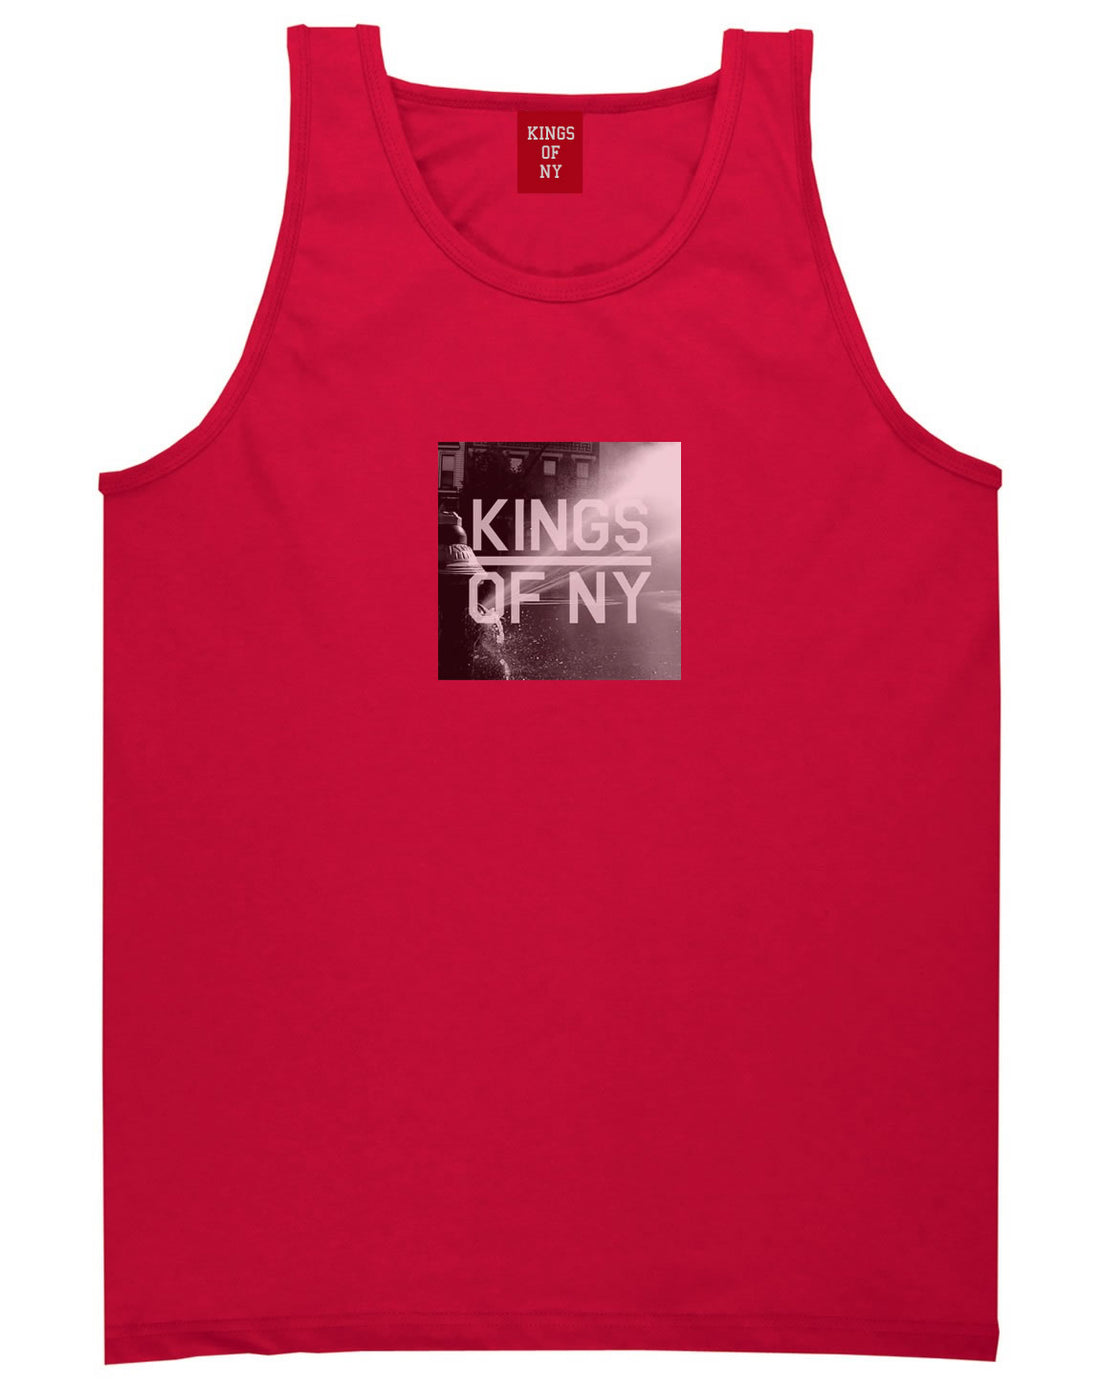 NYC Fire Hydrant Pump Summer Mens Tank Top Shirt Red